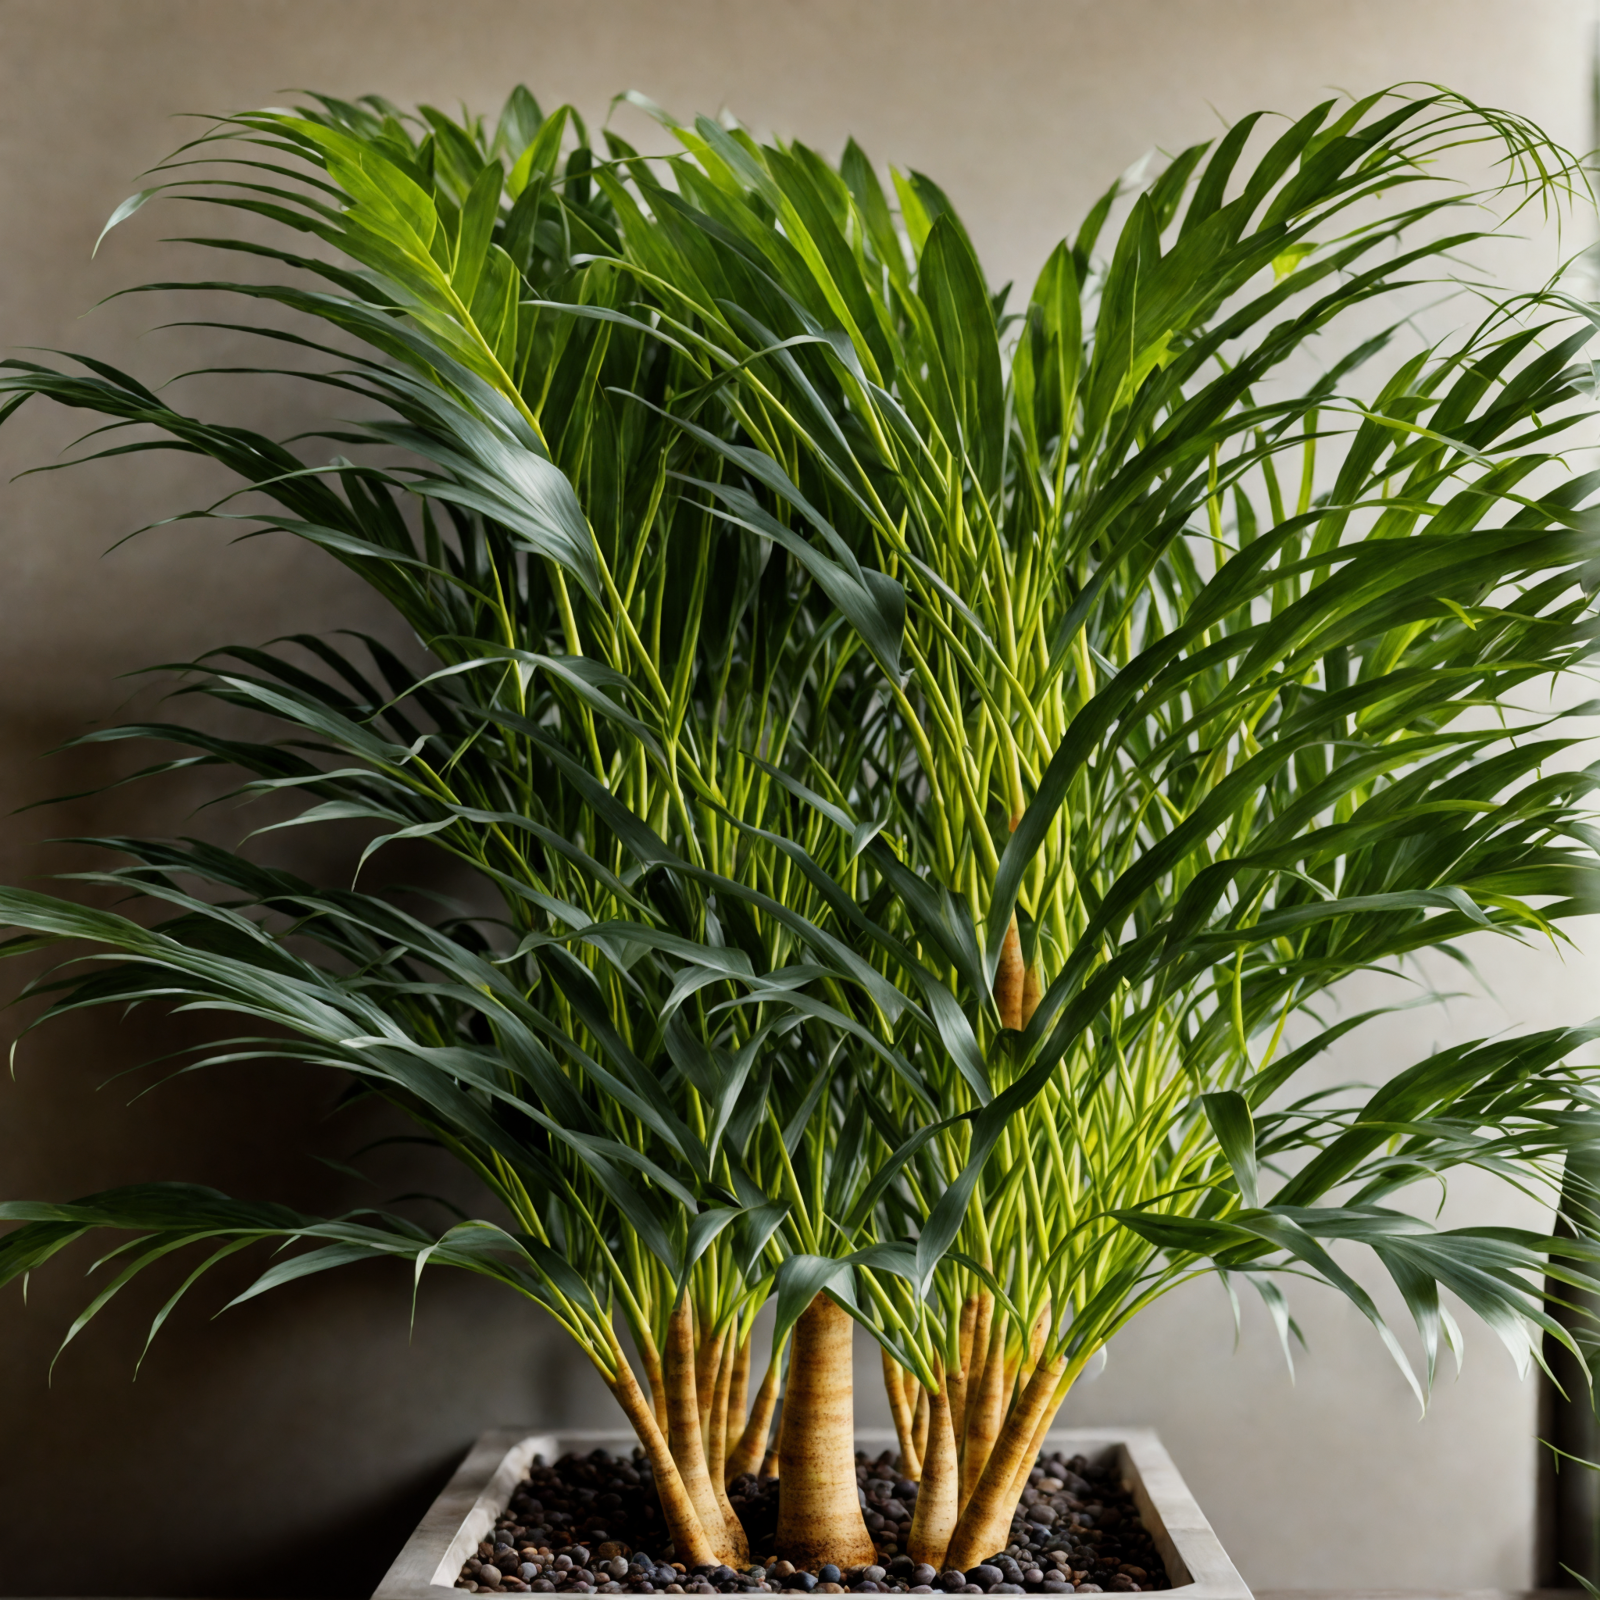 Potted Dypsis lutescens (Areca Palm) on a table, with clear lighting and a dark background.